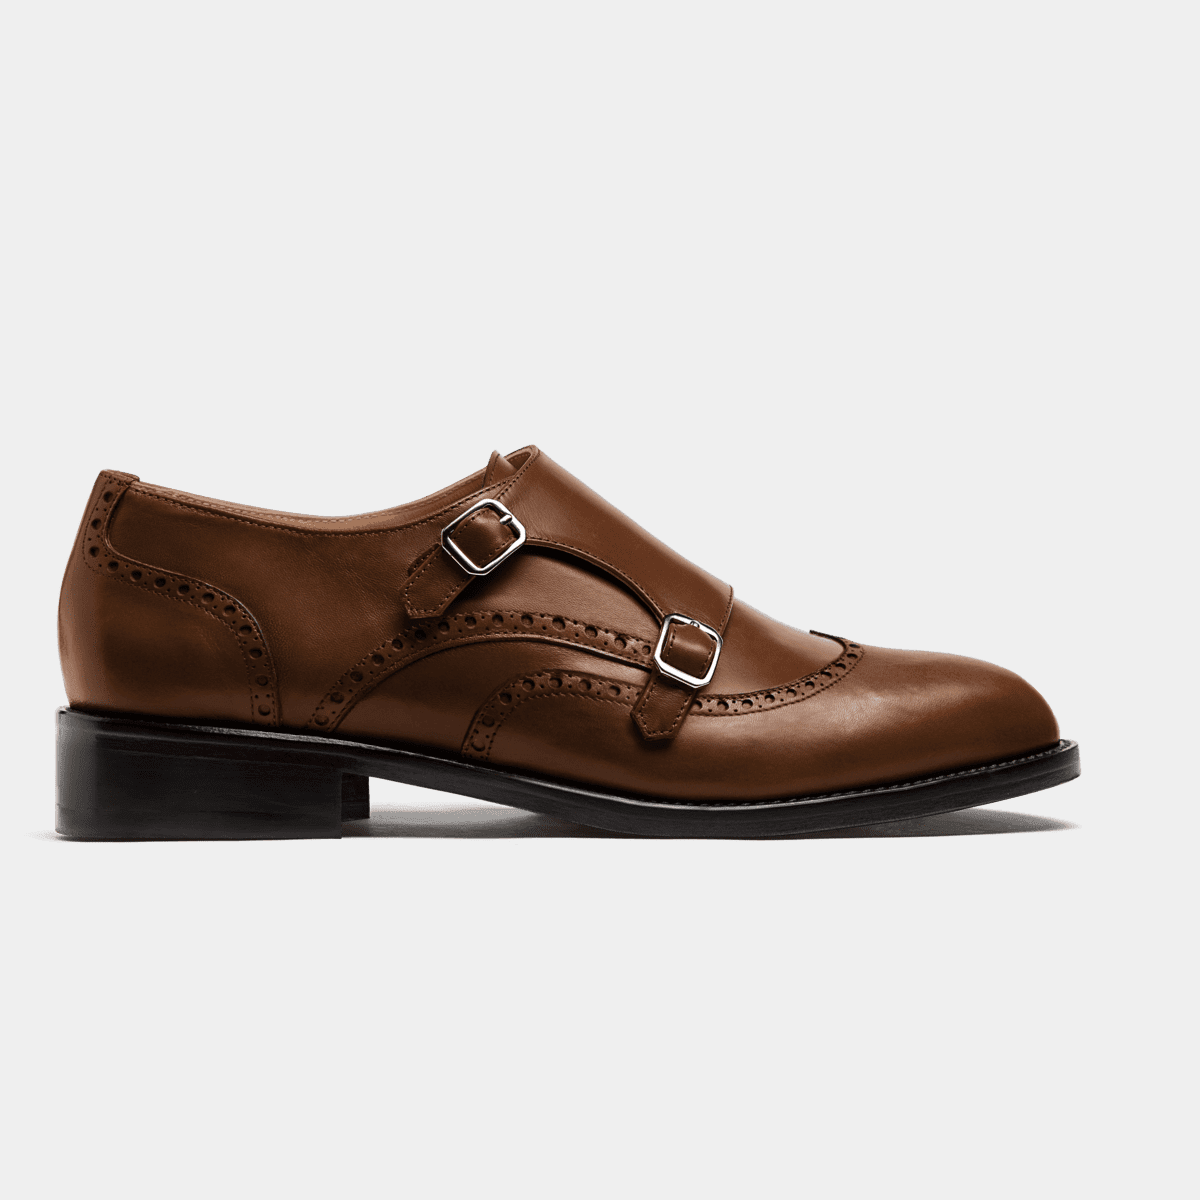 Monk Brogues - brown italian calf leather $222 | Sumissura